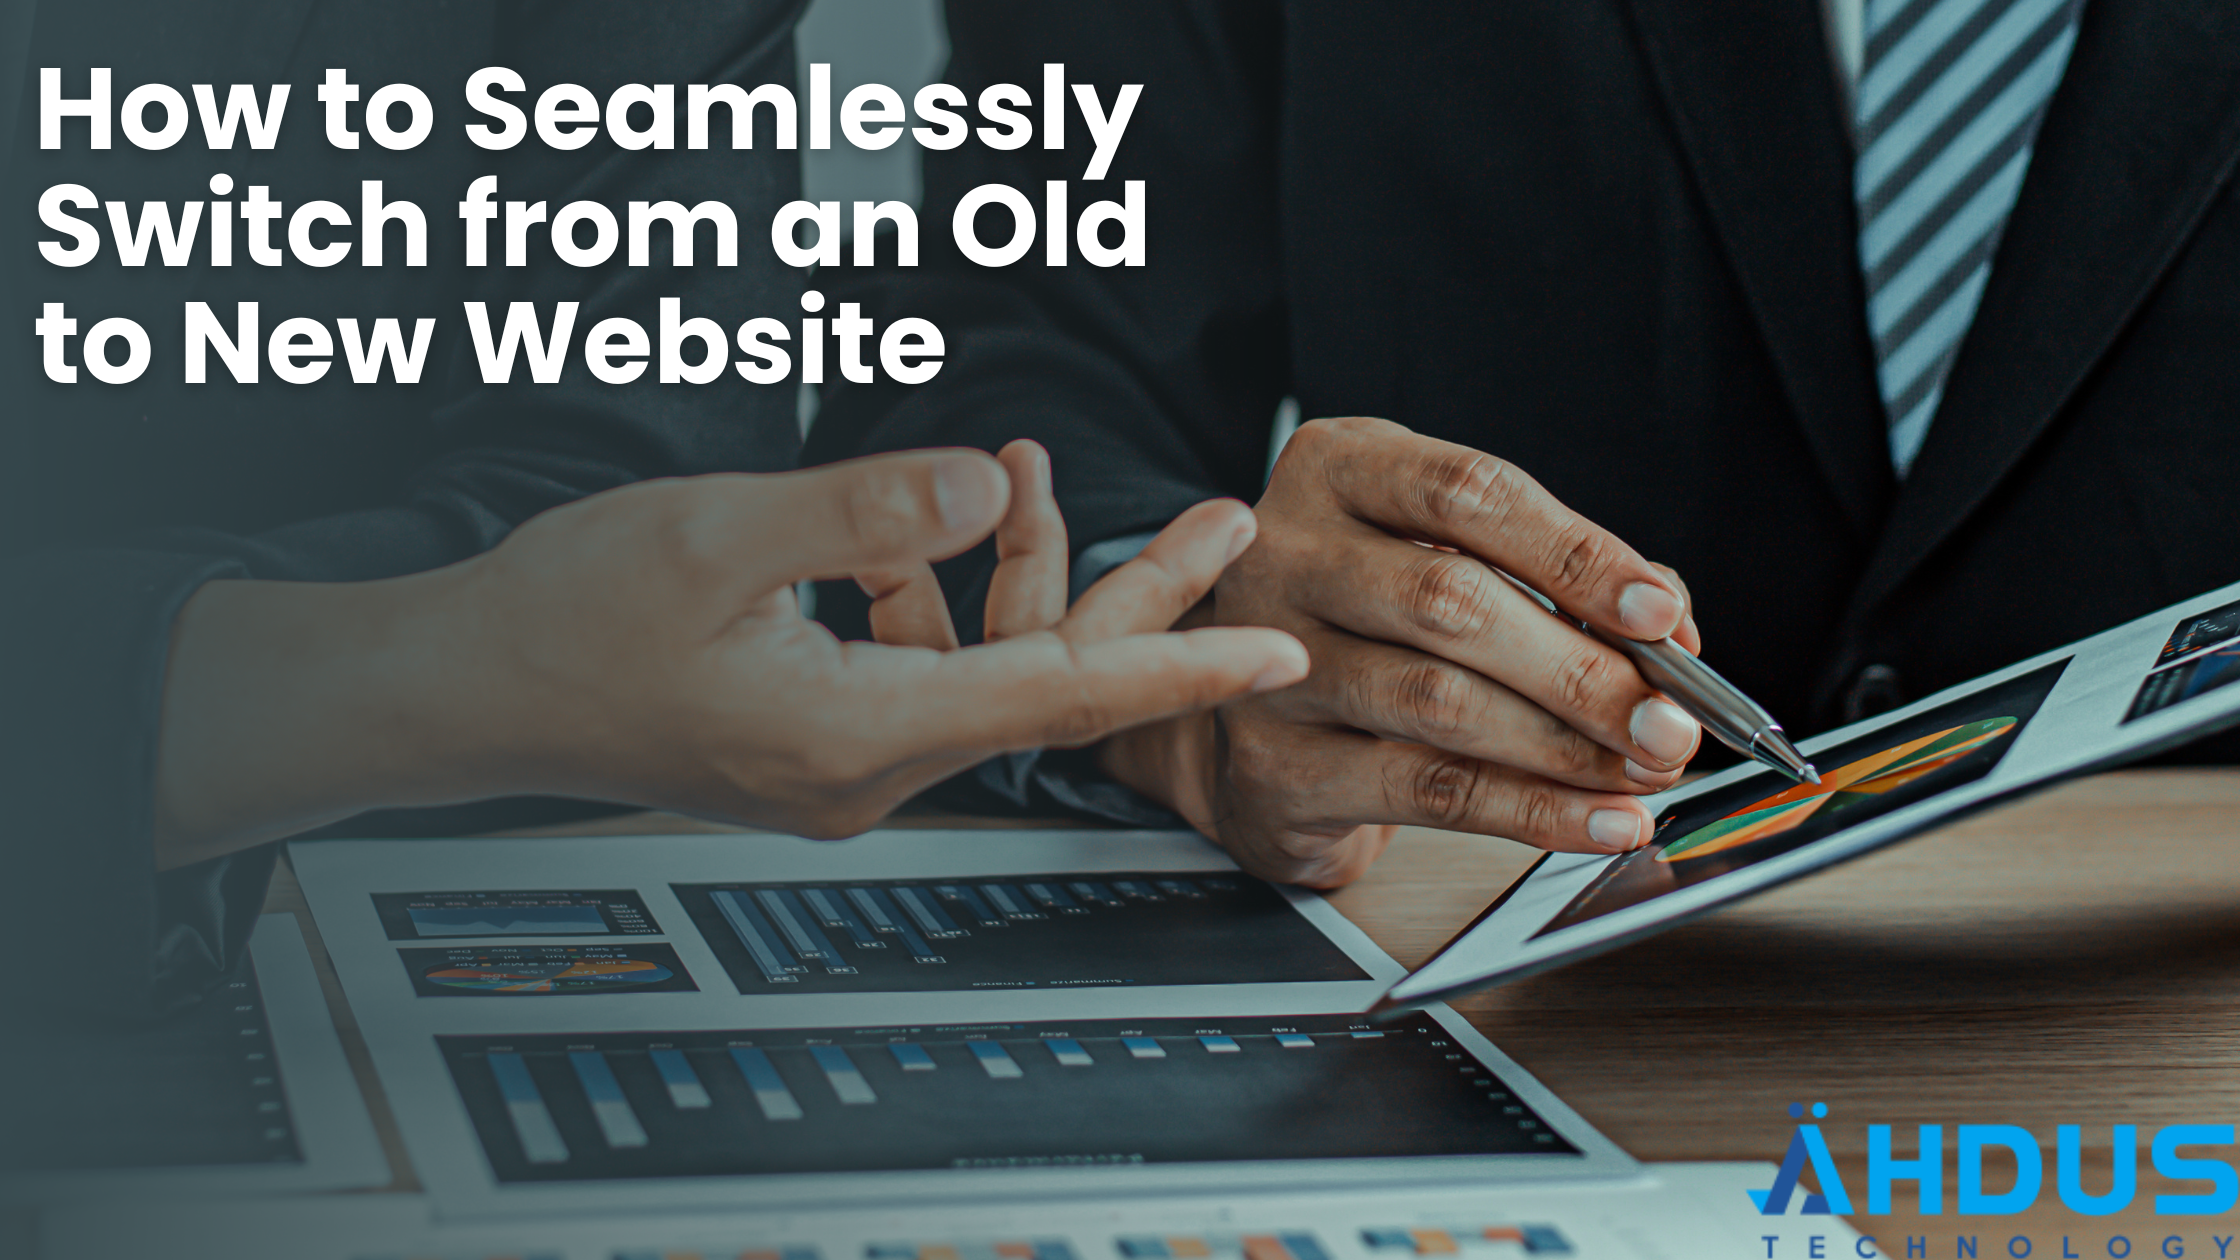 How to Seamlessly Switch from an Old to New Website